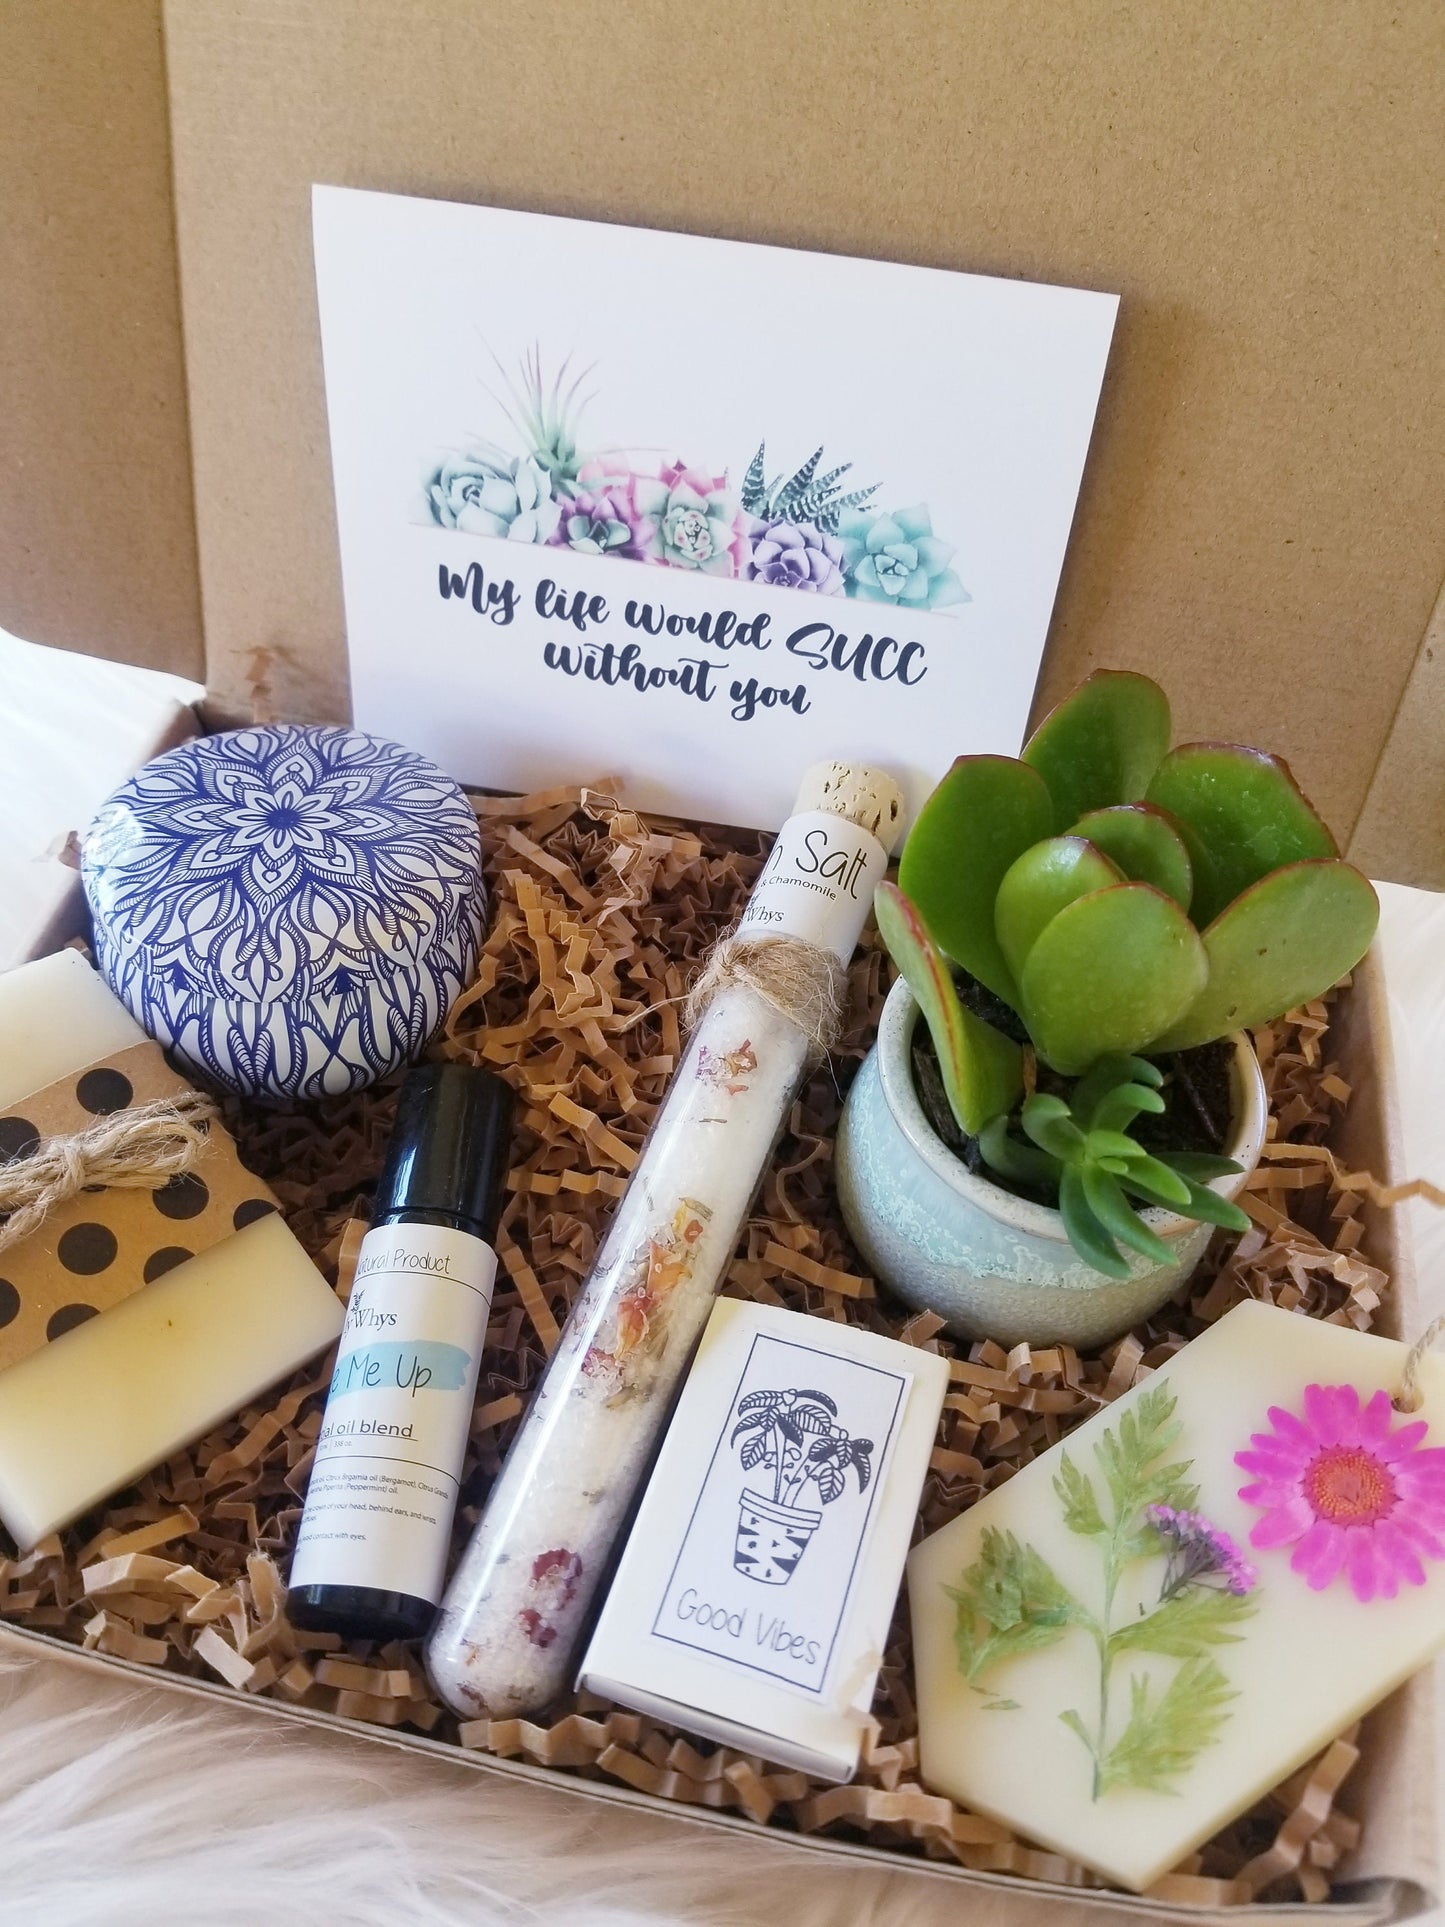 My life would SUCC without you - spa gift set, Thinking of you care package